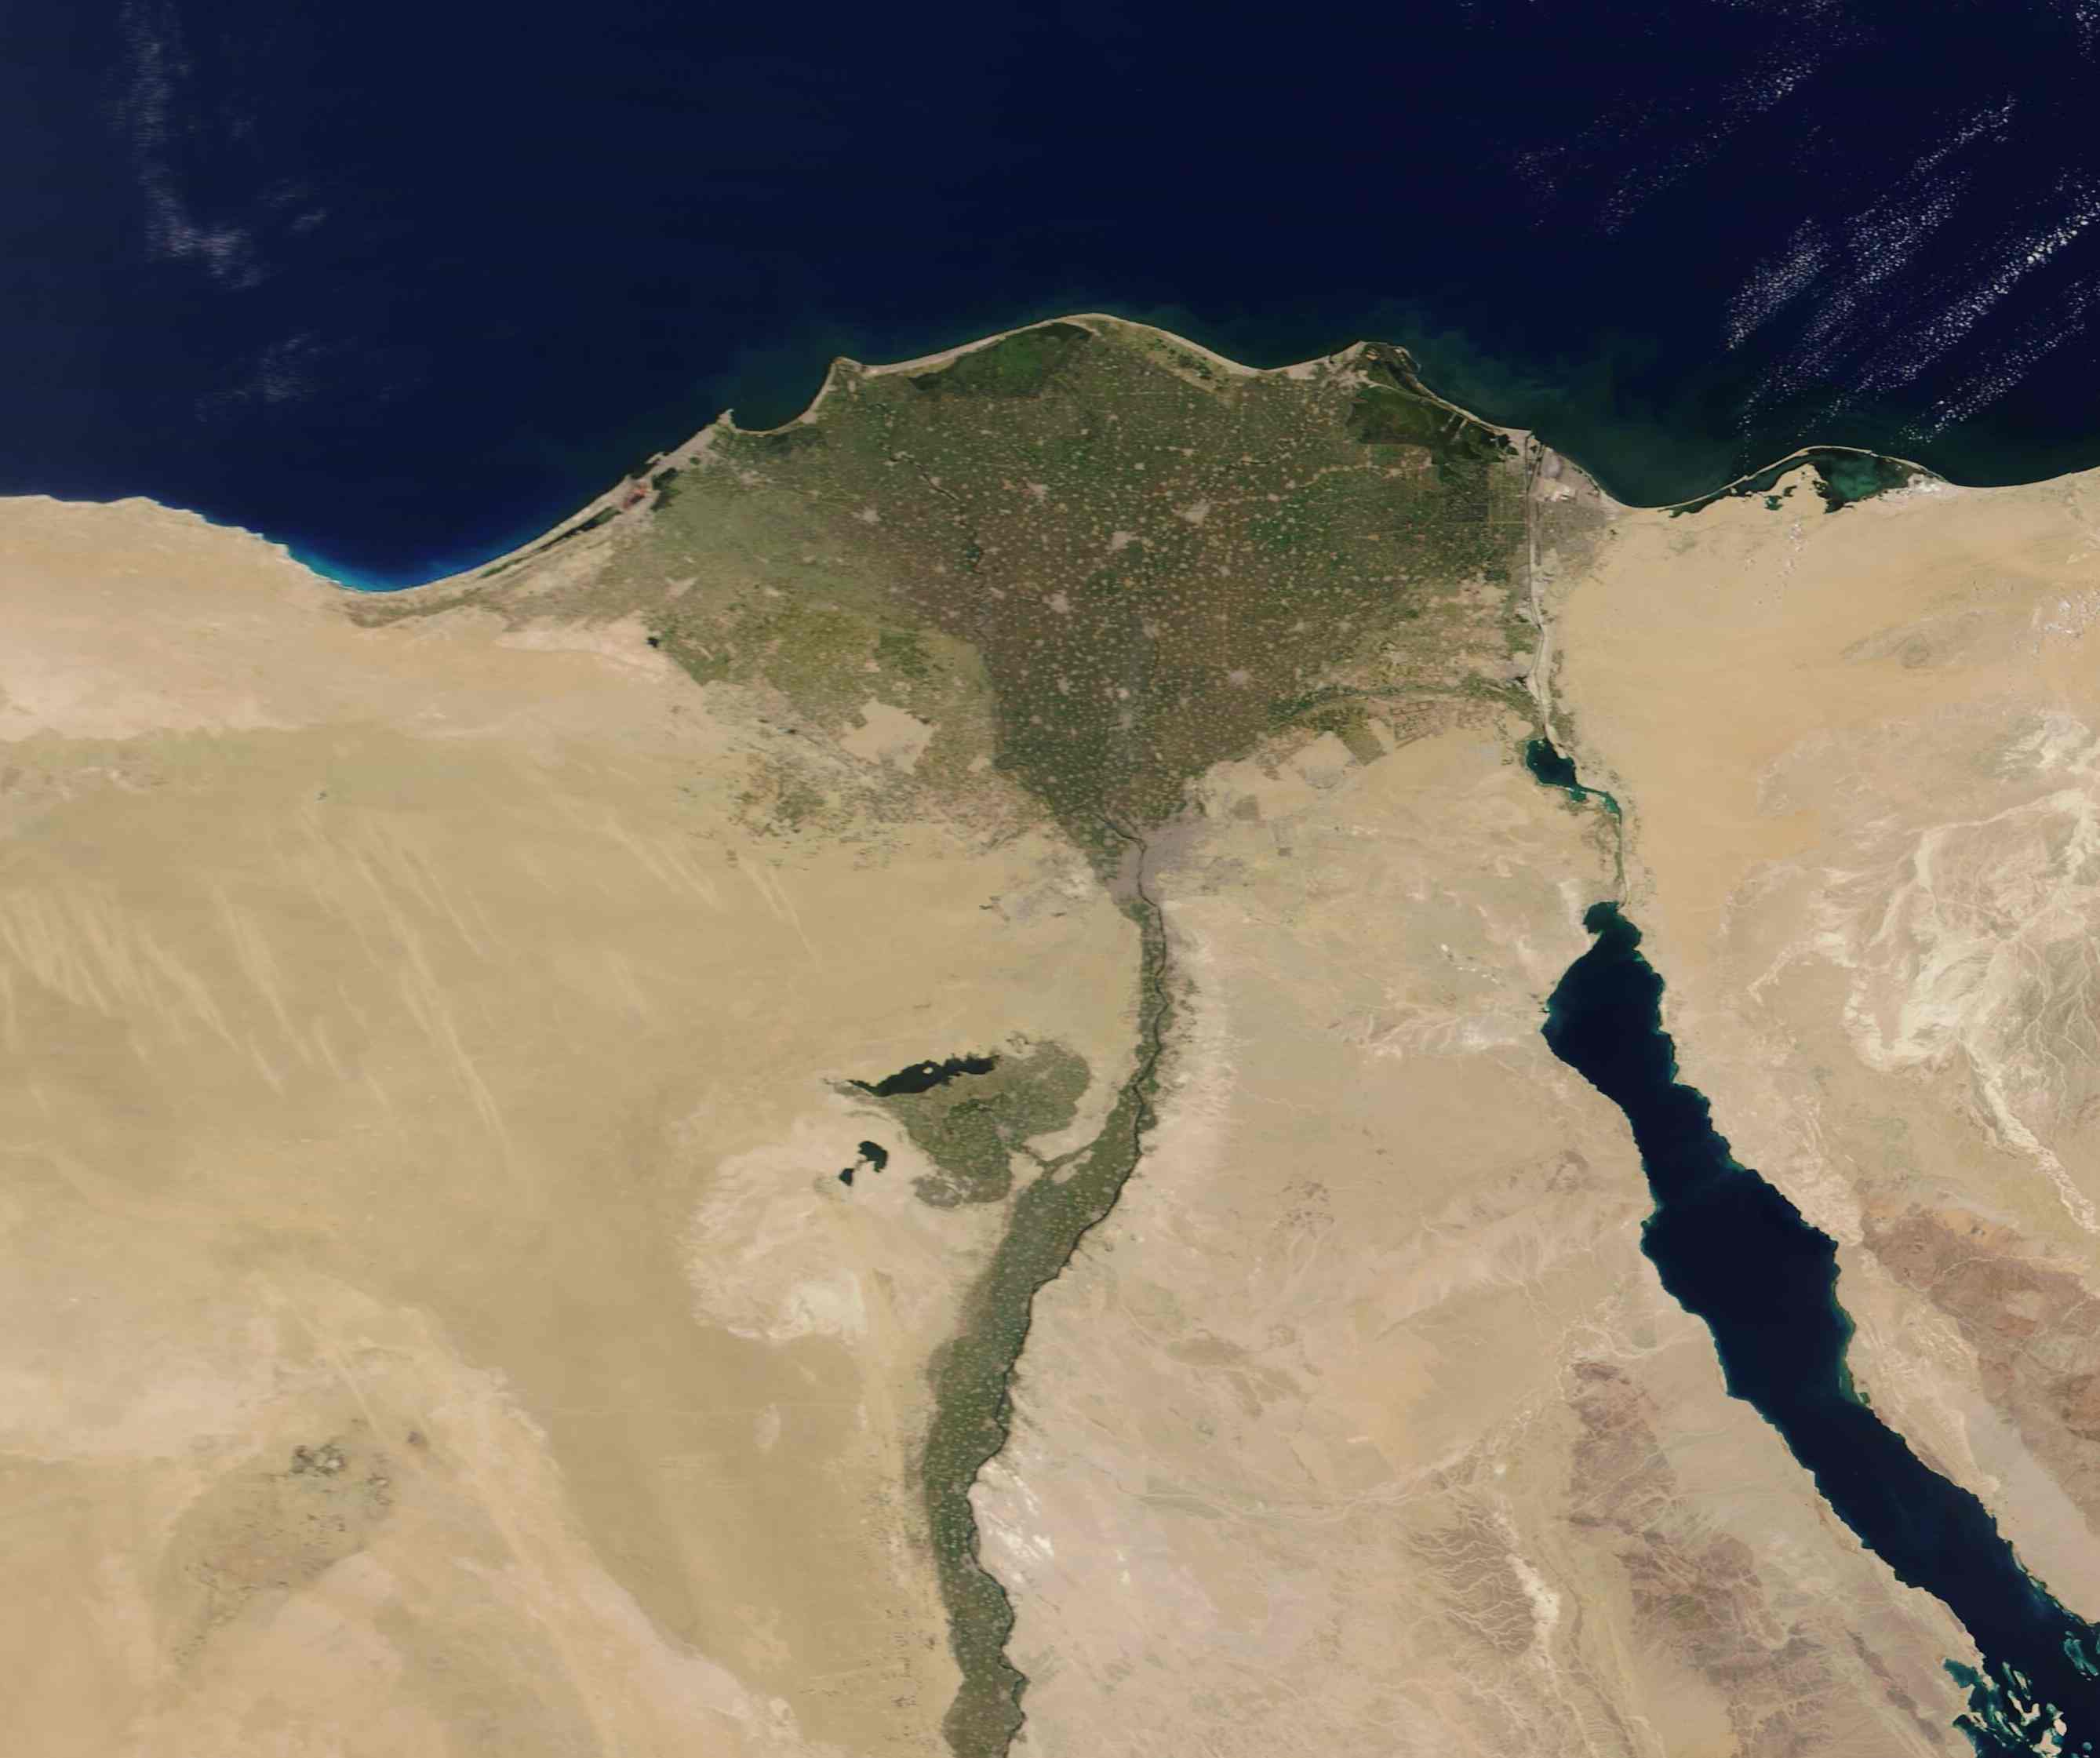 Nile Delta from space